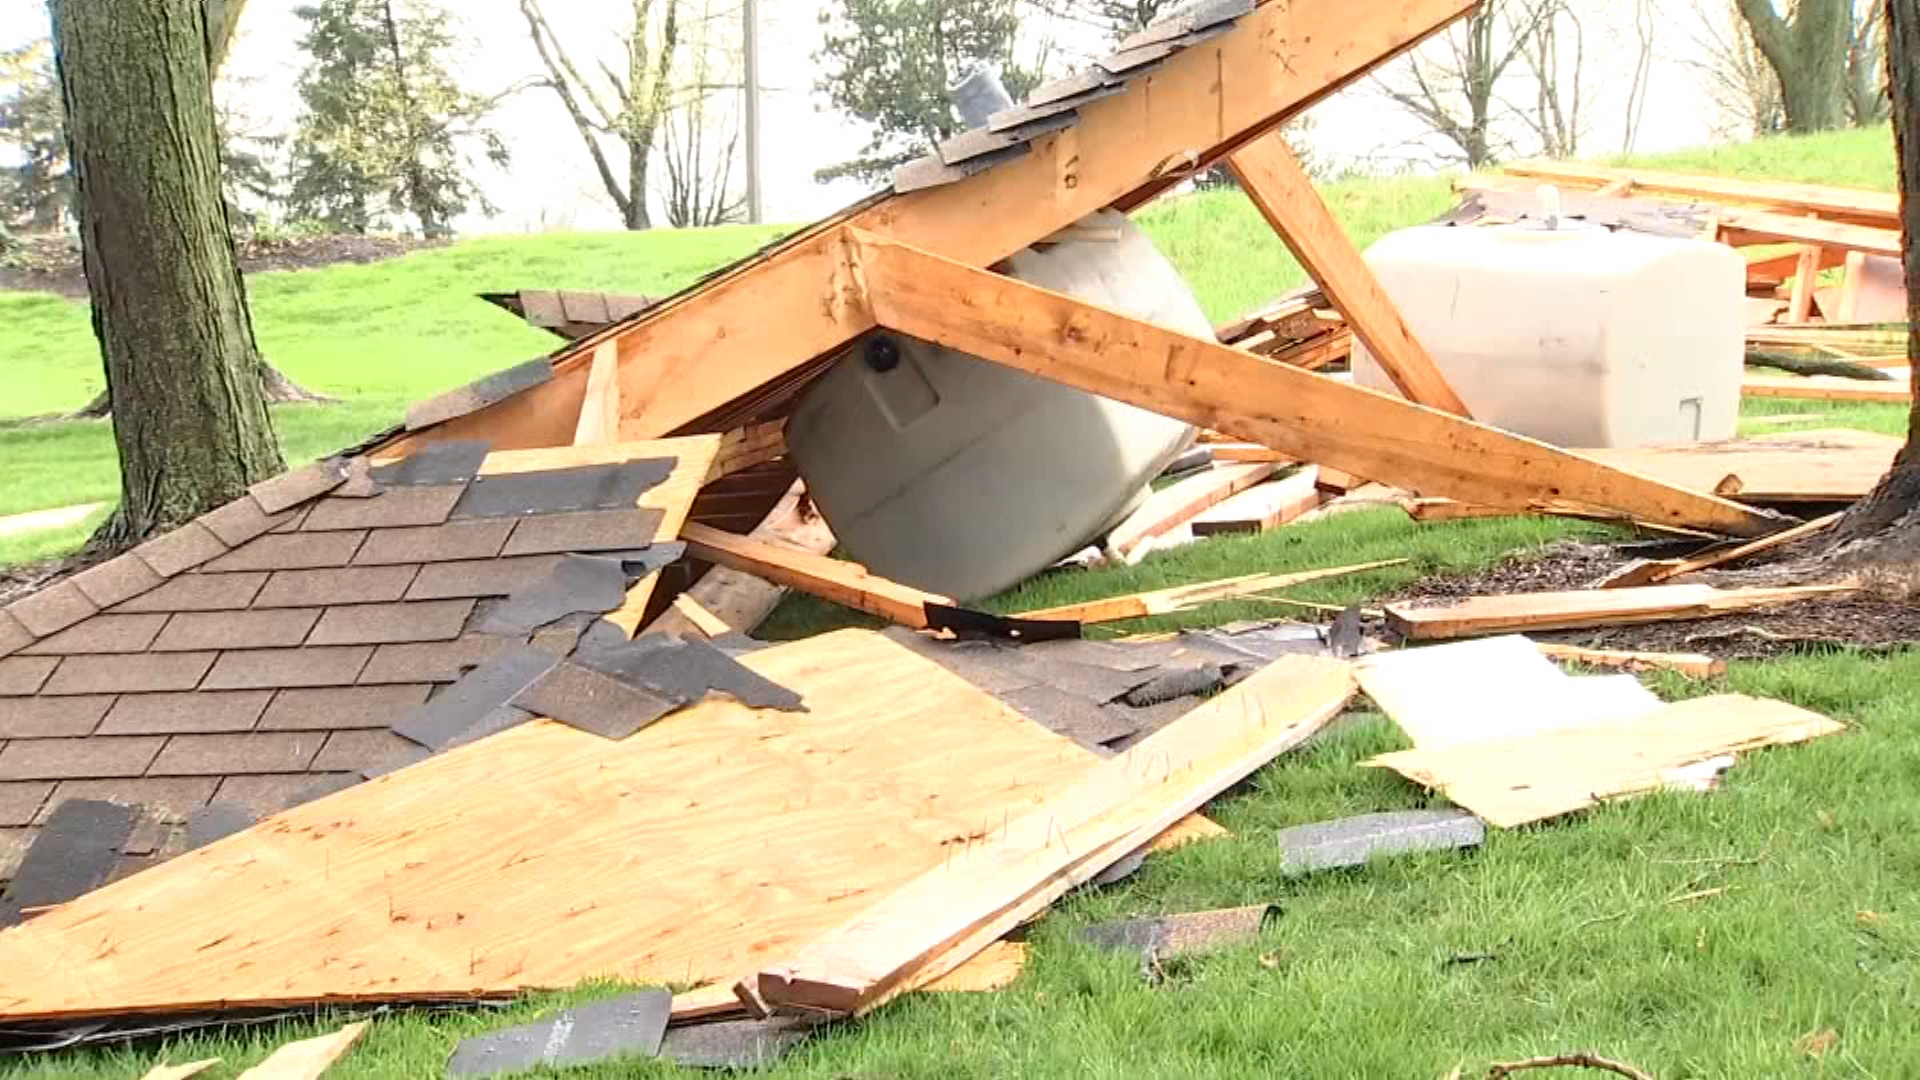 At Least 3 Tornadoes Touched Down Saturday in Oak Brook, Boone County: Officials